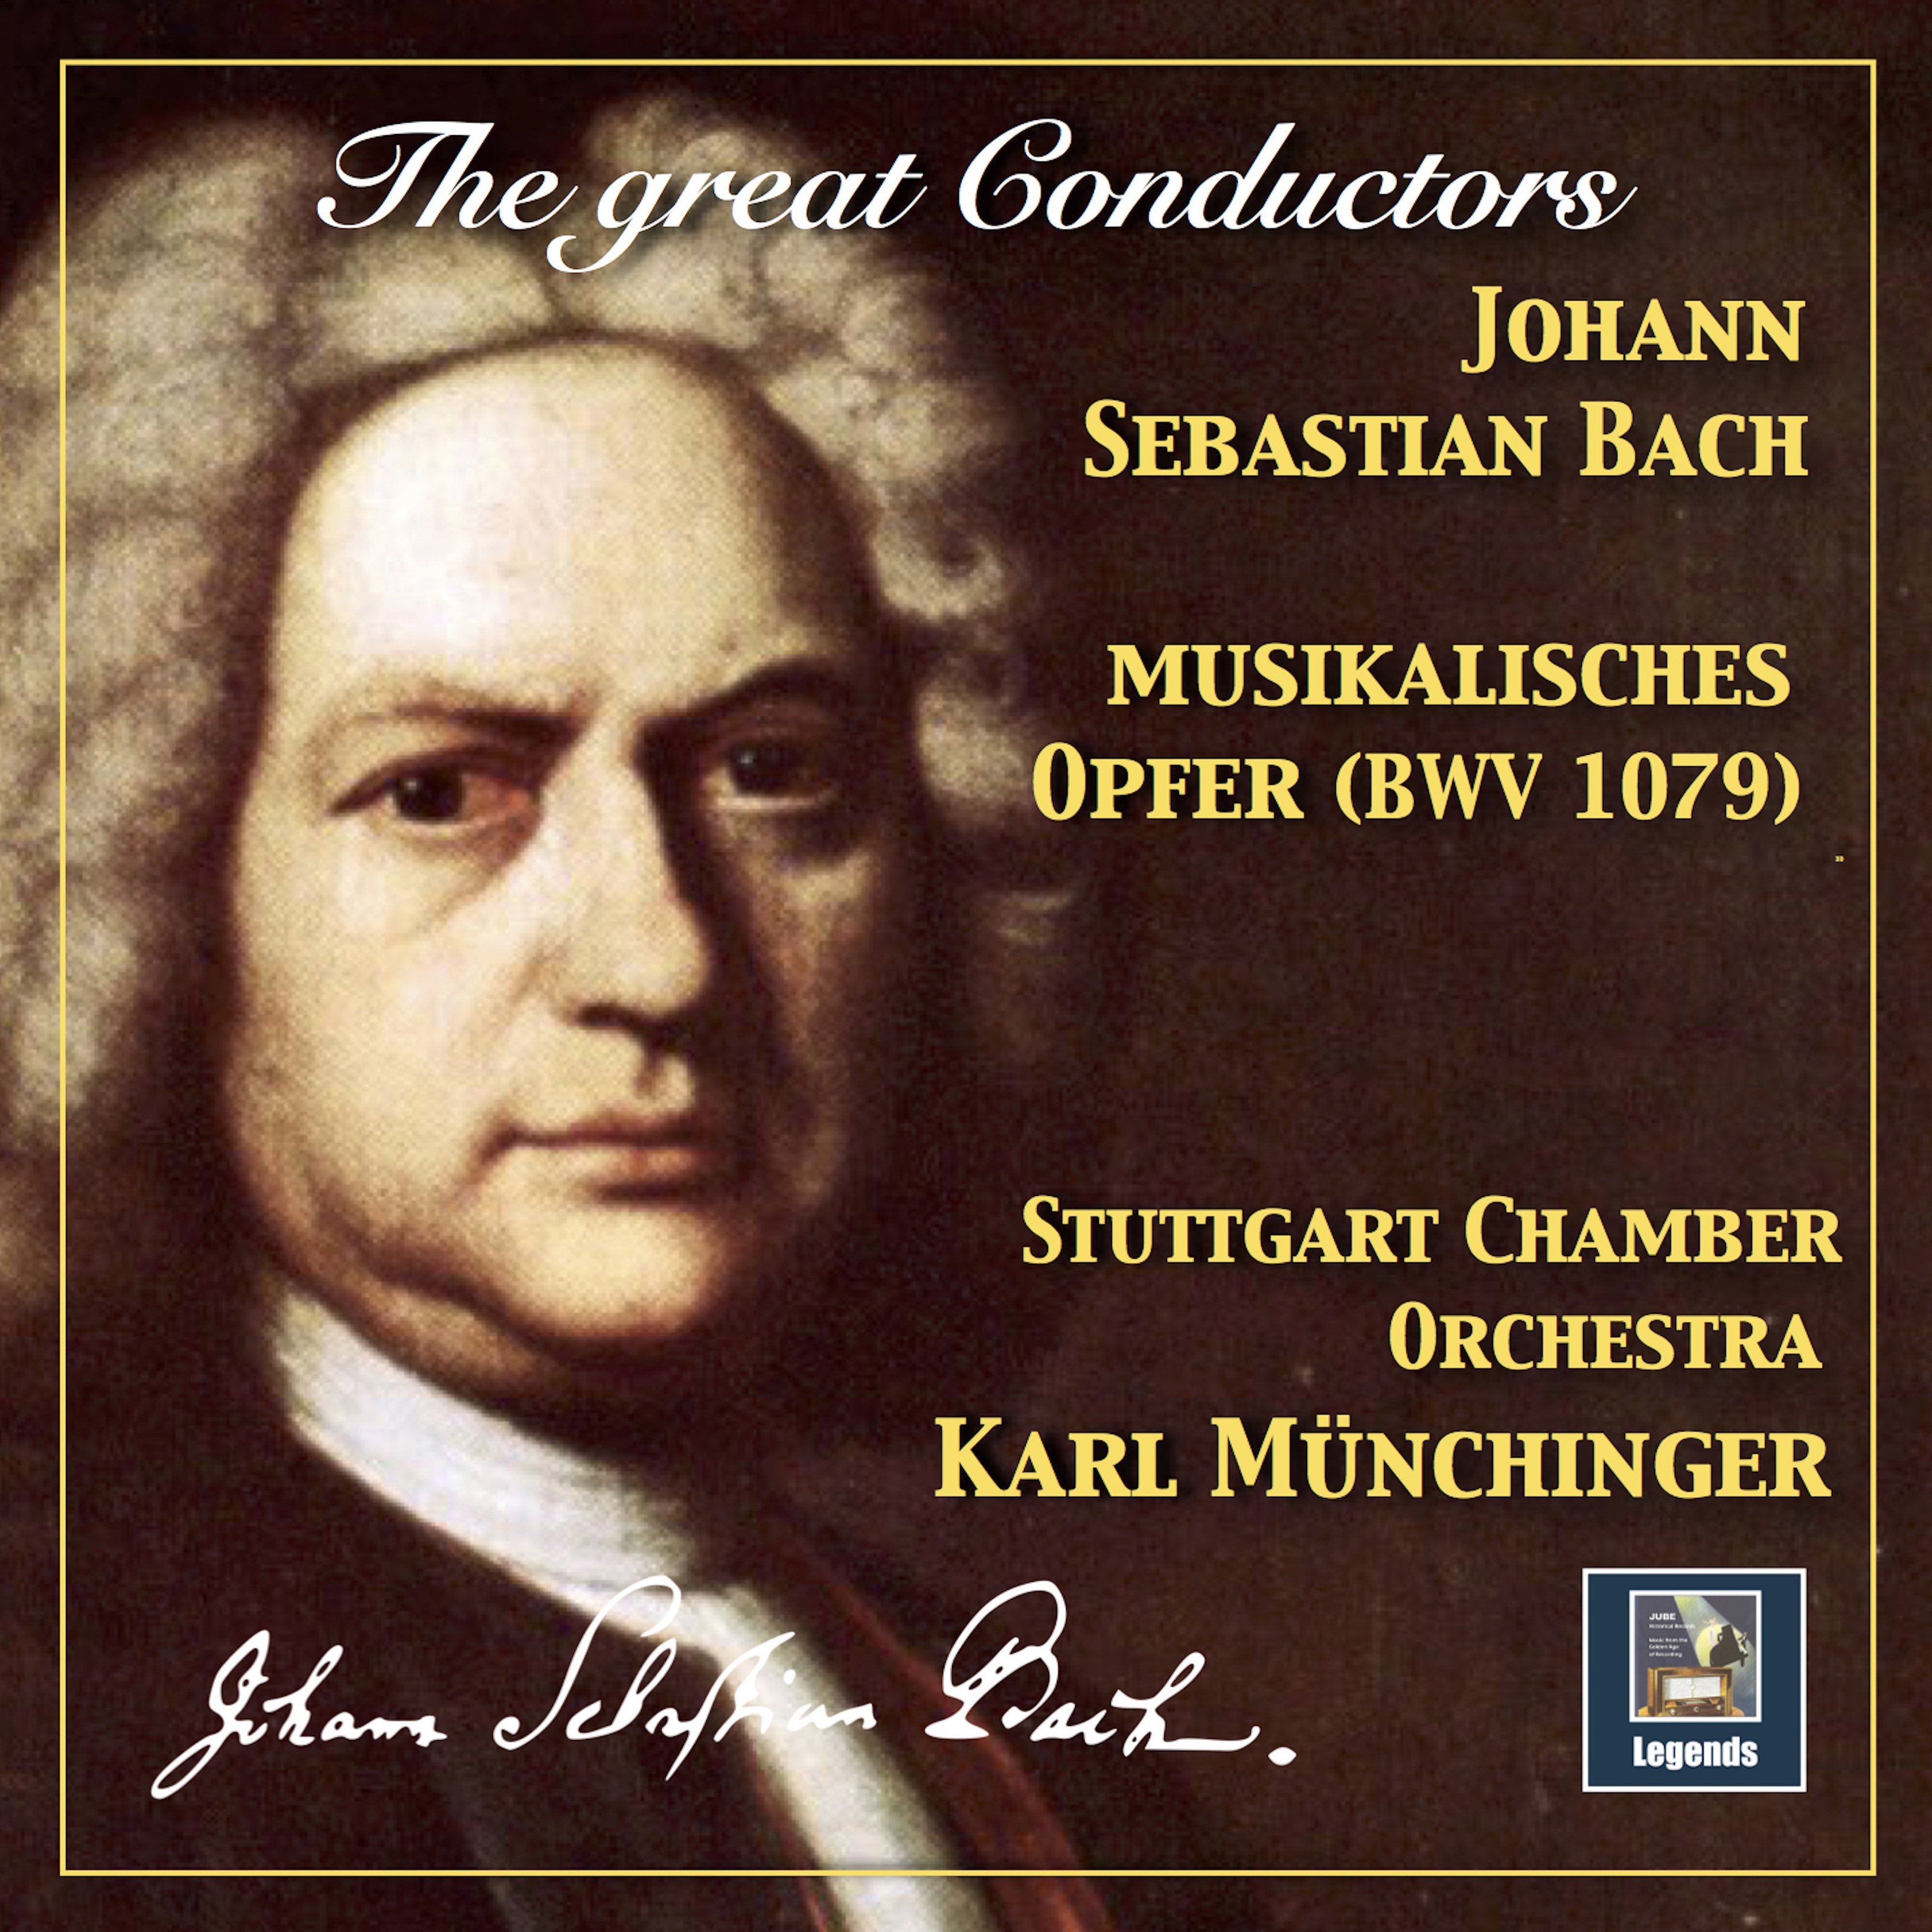 Musikalisches Opfer, BWV 1079 Arr. K. Mü nchinger for Chamber Orchestra: Fuga canonica in epidiapente